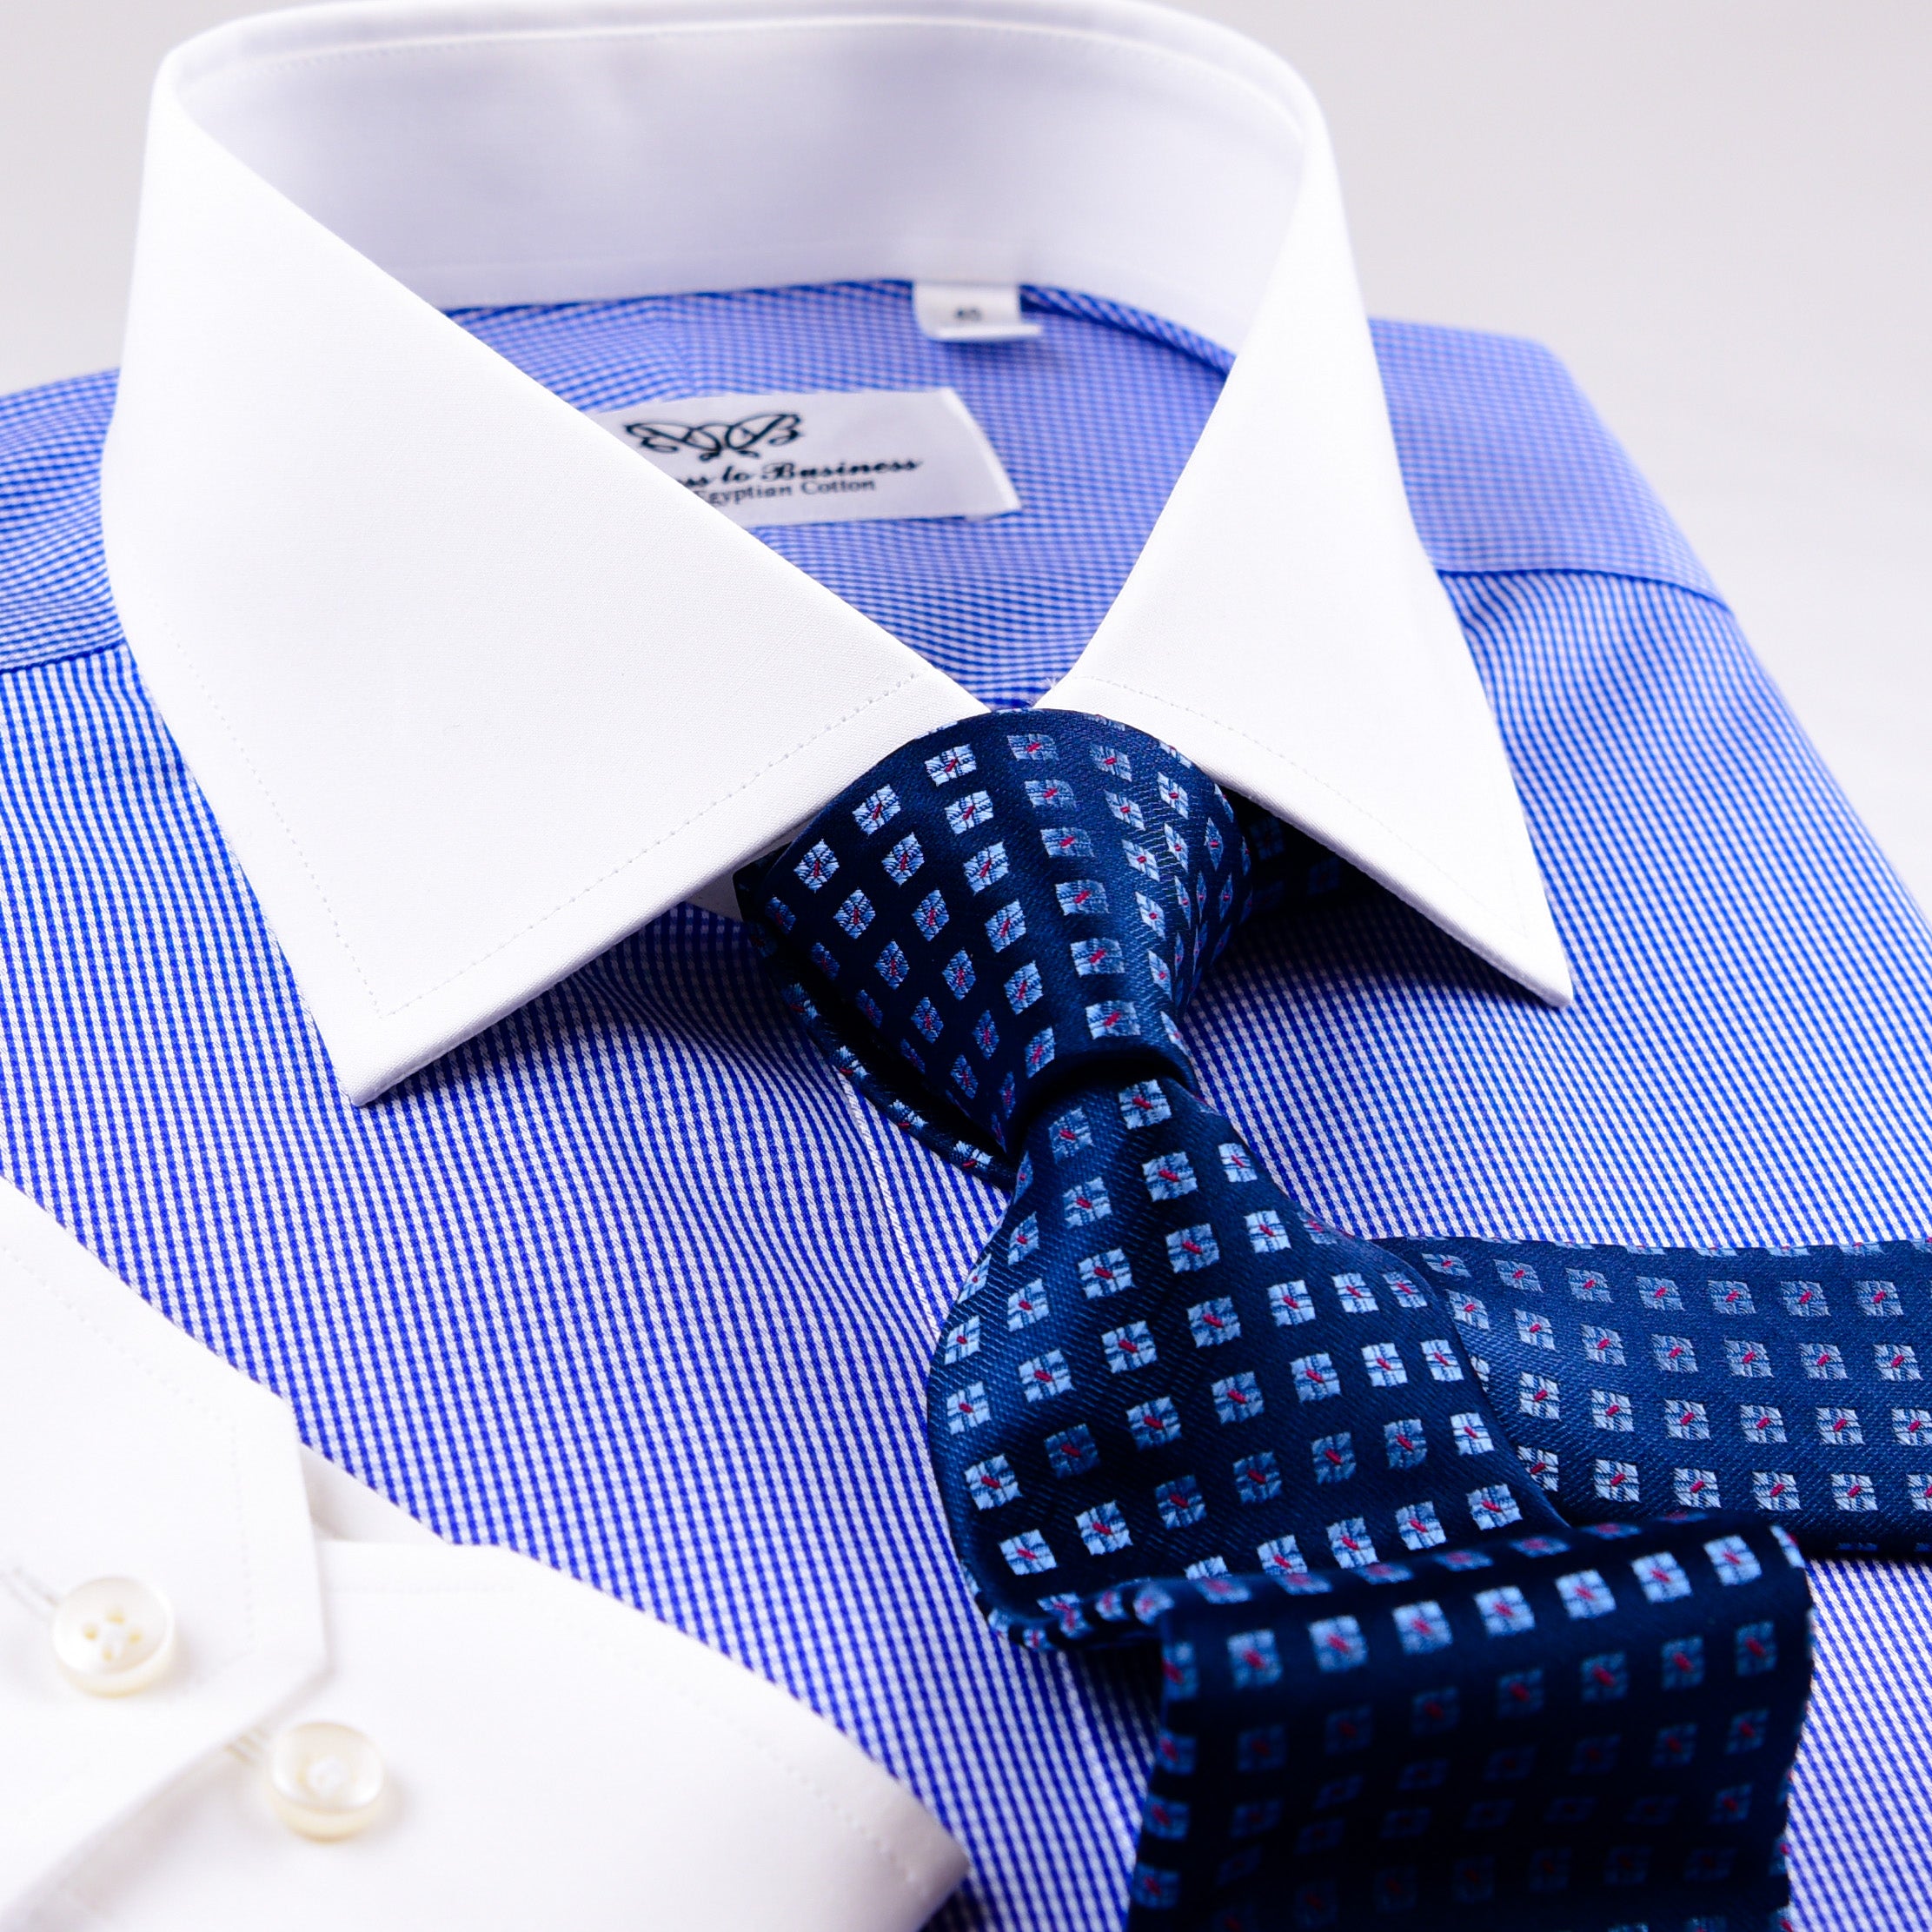 Mini Blue Gingham Check Formal Business Dress Shirt Contrast Collar And ...